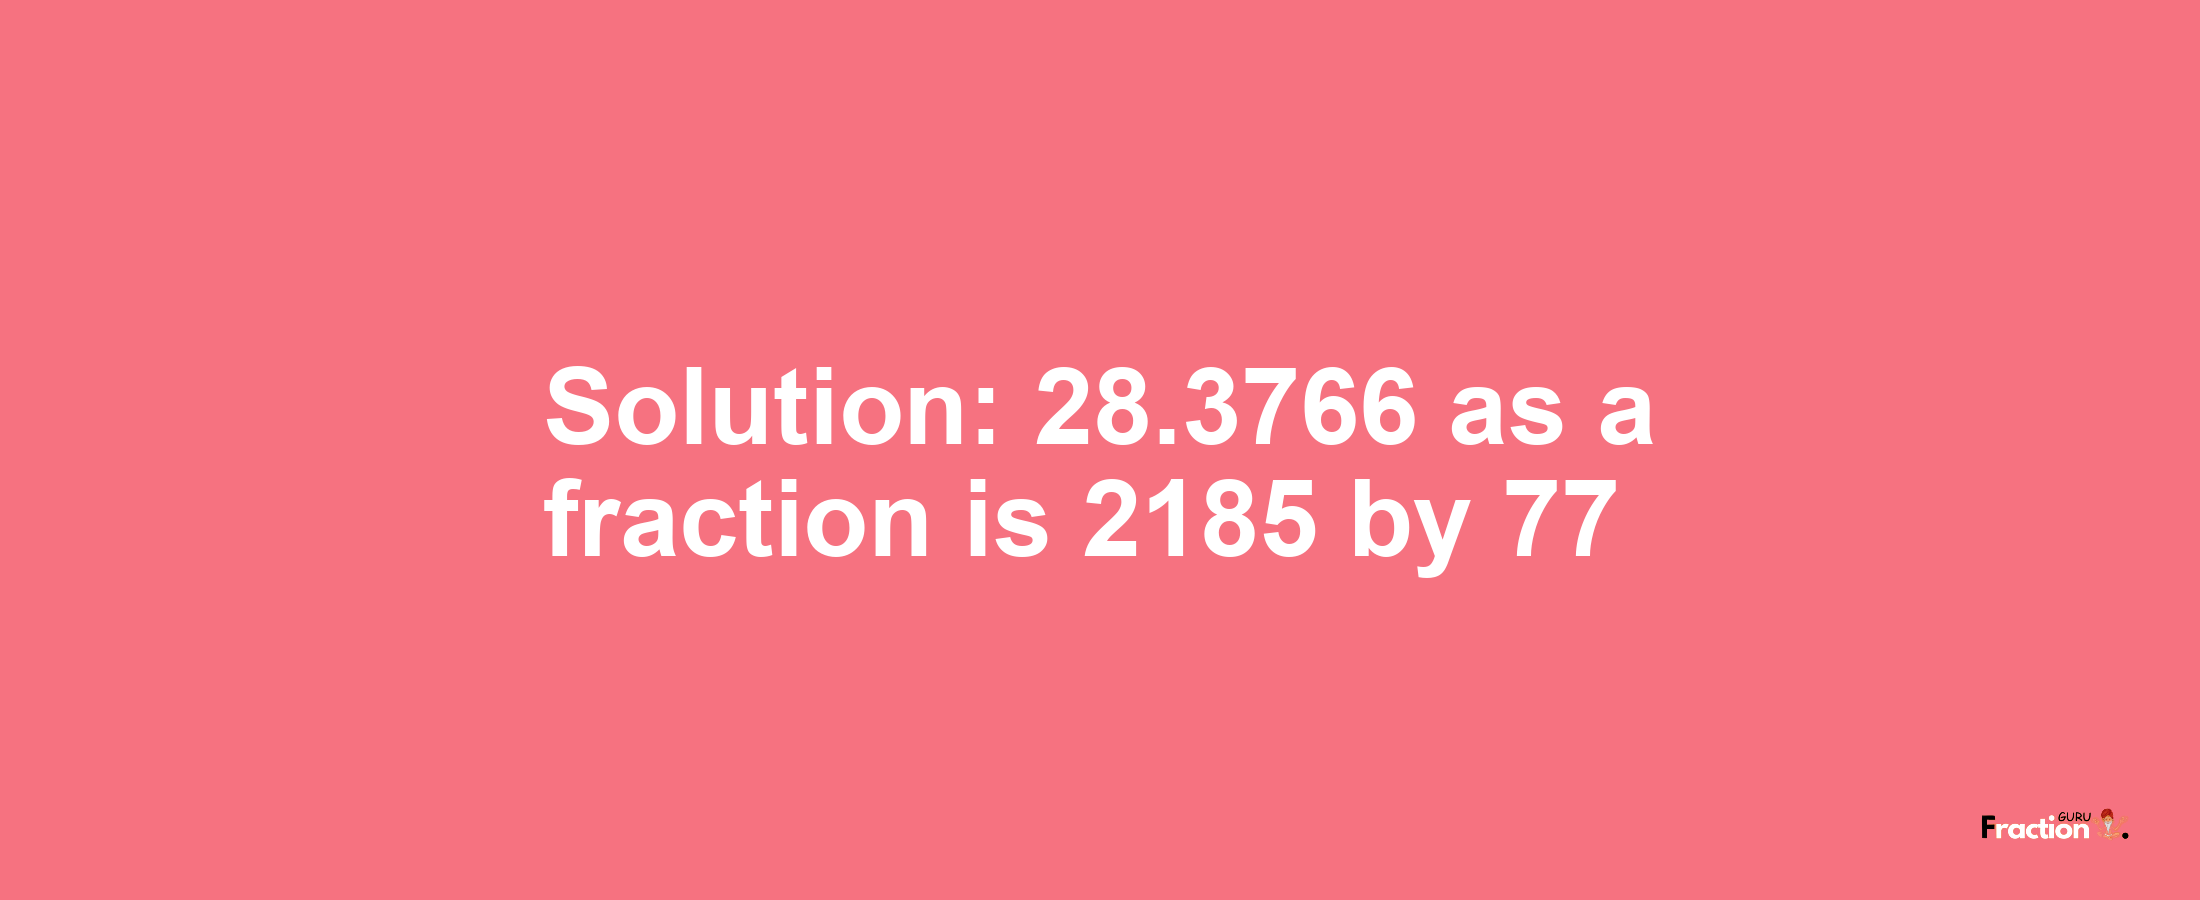 Solution:28.3766 as a fraction is 2185/77